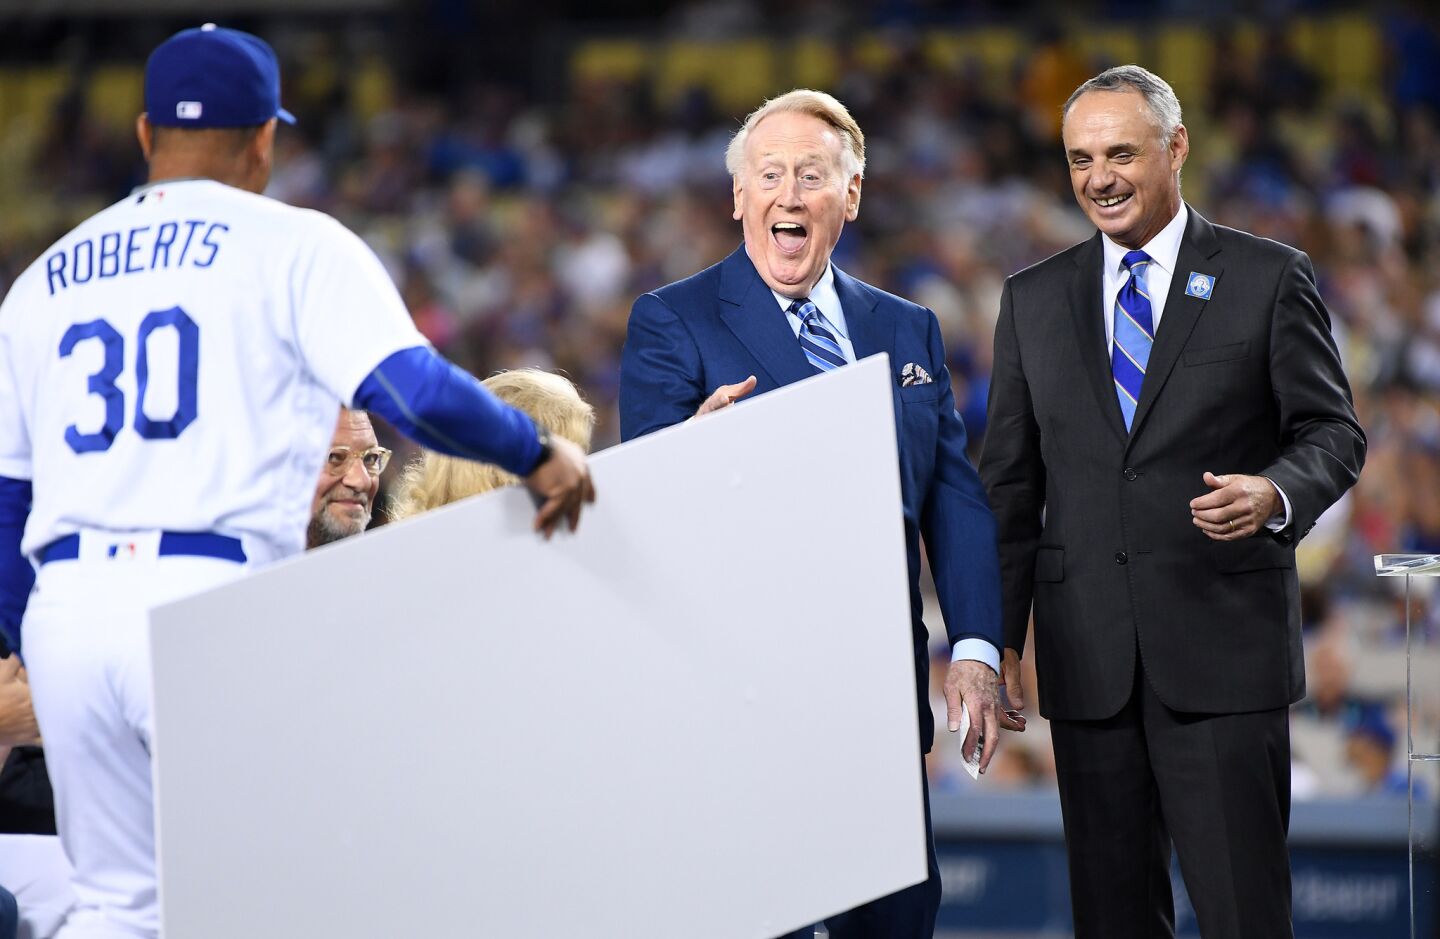 Dodgers Manager Dave Roberts (30) joins MLB Commissioner Rob Manfred, right, in presenting a check to Vin Scully to be donated to the Dodgers broadcaster's favorite charity during a pregame ceremoney Sept. 23, 2016.